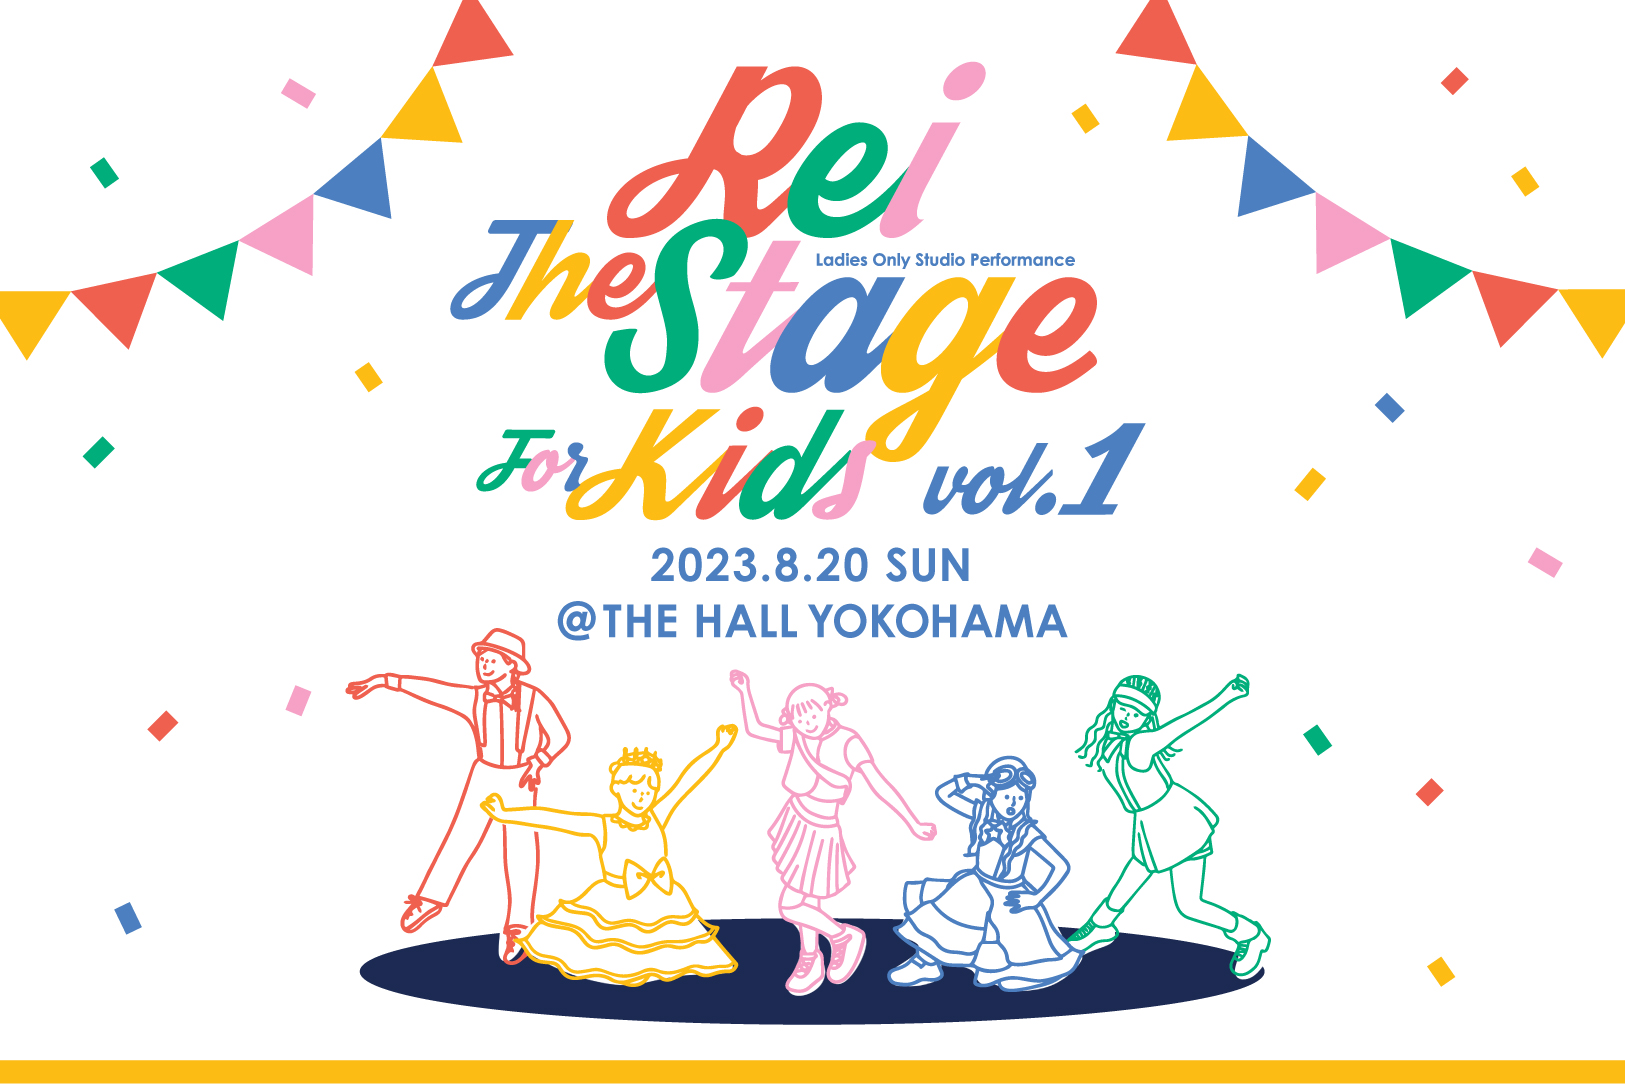 Rei The Stage for KIDS vol.1